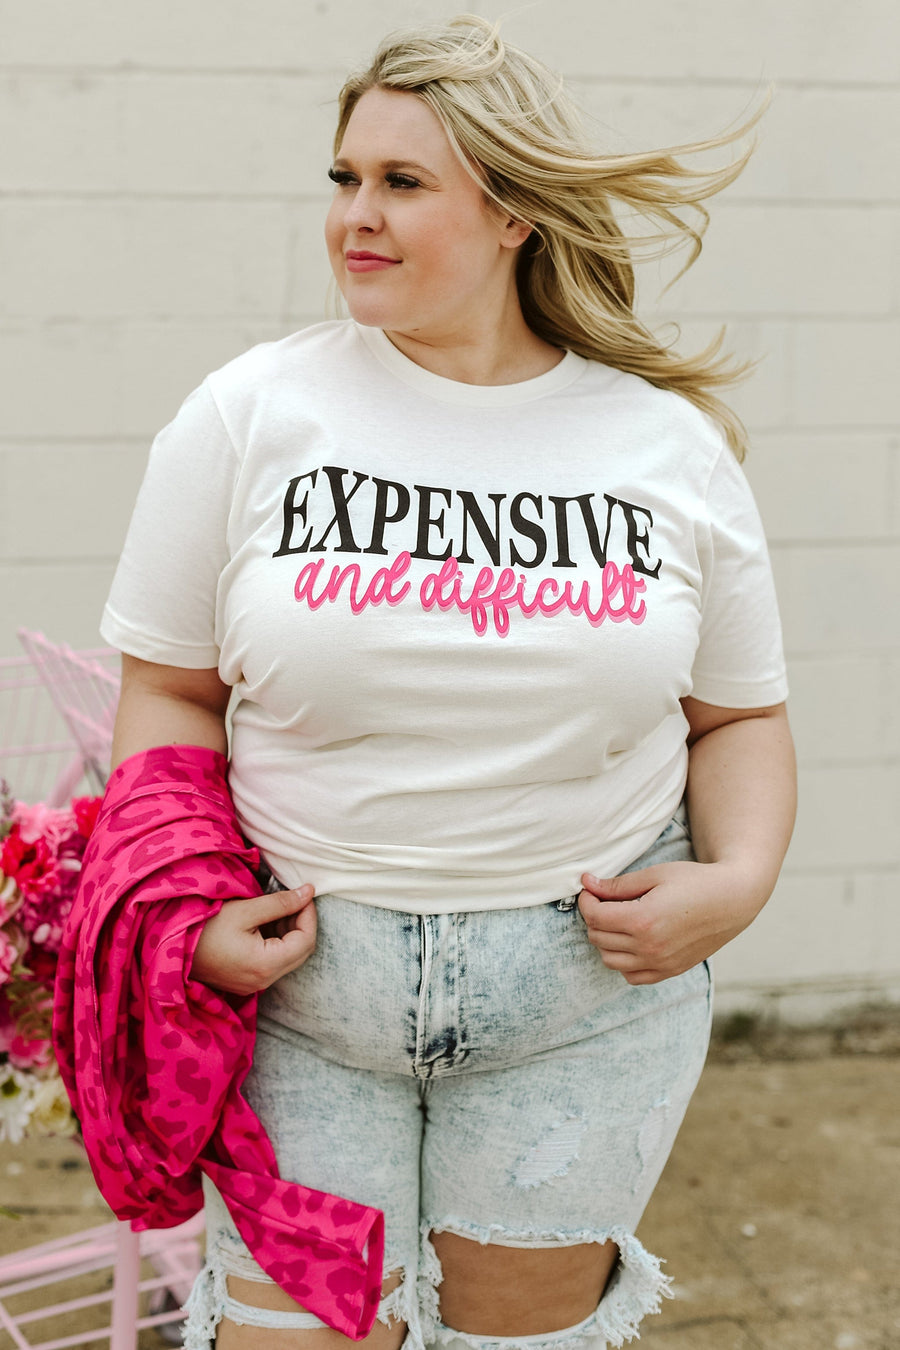 Curvy Fashion, Plus Sized Clothing Guides and Tips to Look Your Best!